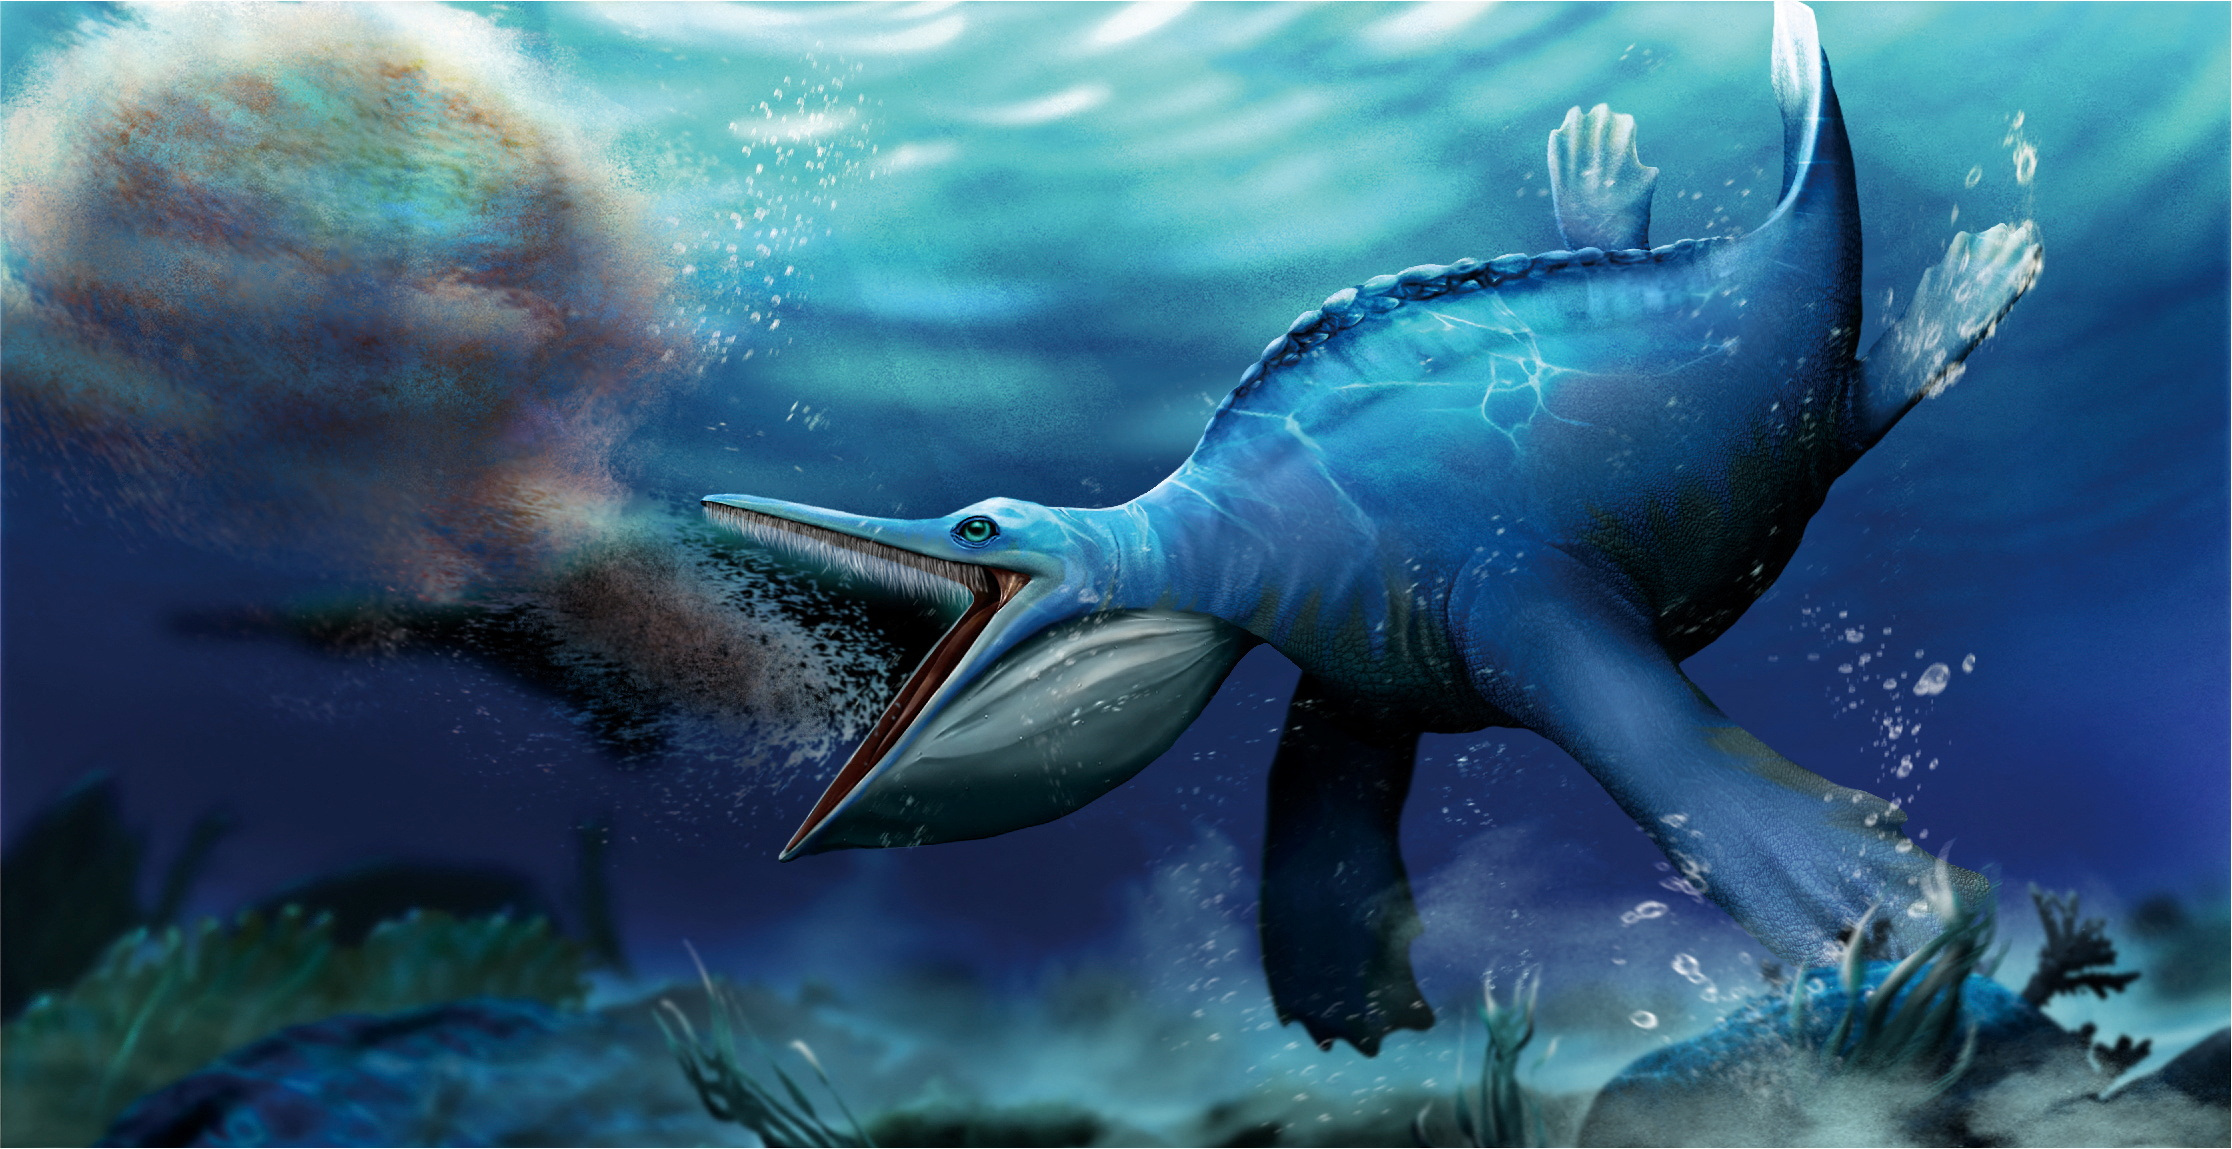 Artist's reconstruction shows the Triassic Period marine reptile Hupehsuchus nanchangensis